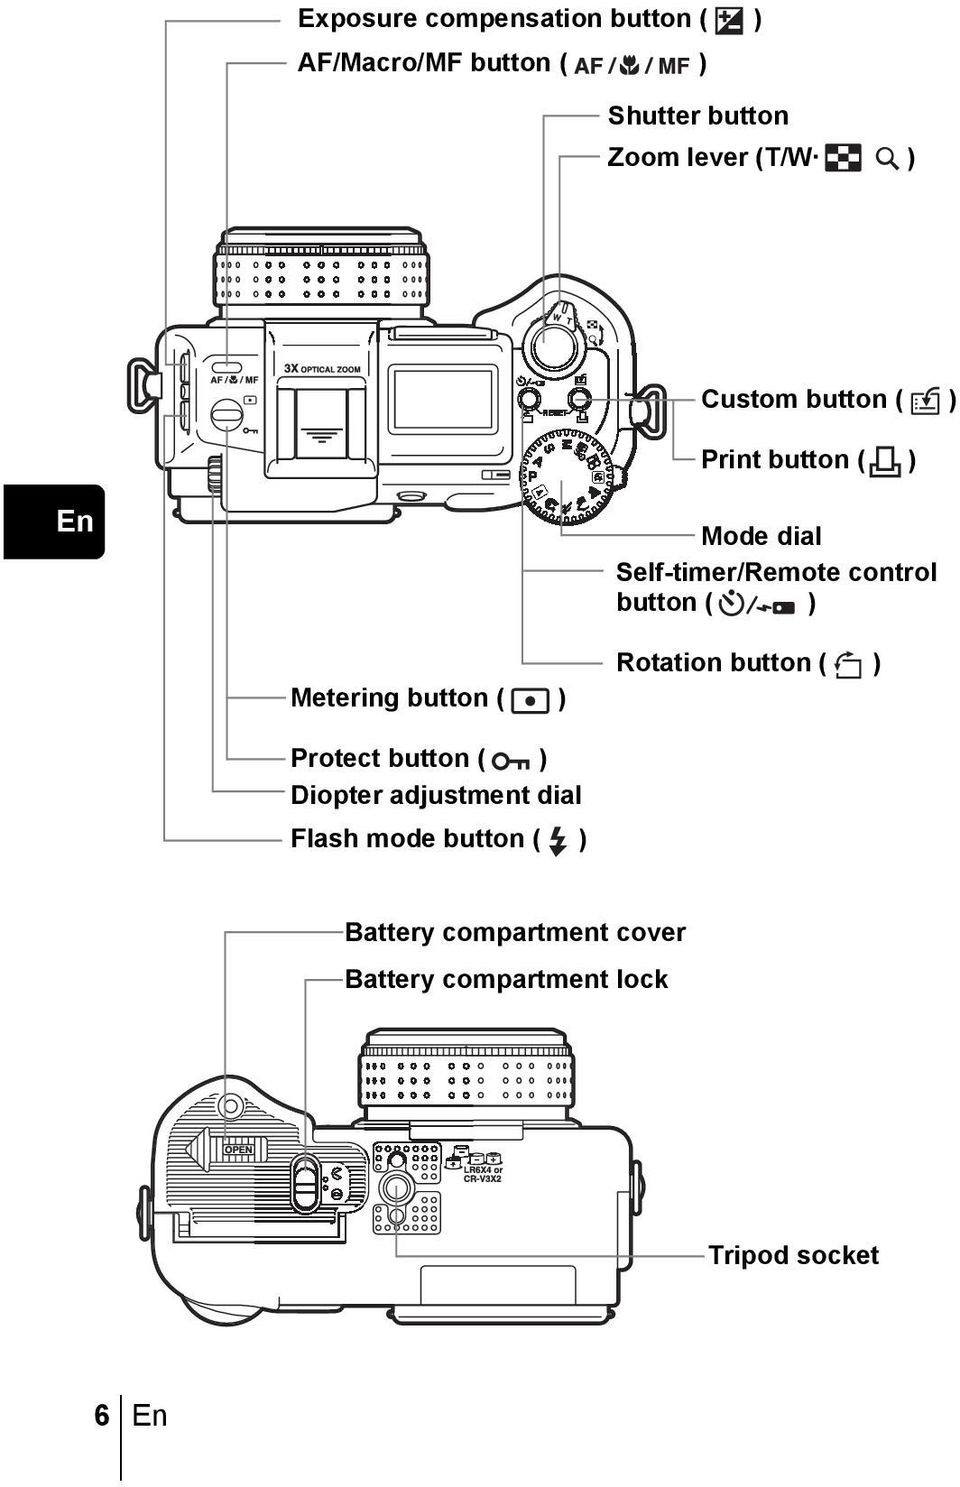 Metering button ( ) Rotation button ( ) Protect button ( ) Diopter adjustment dial